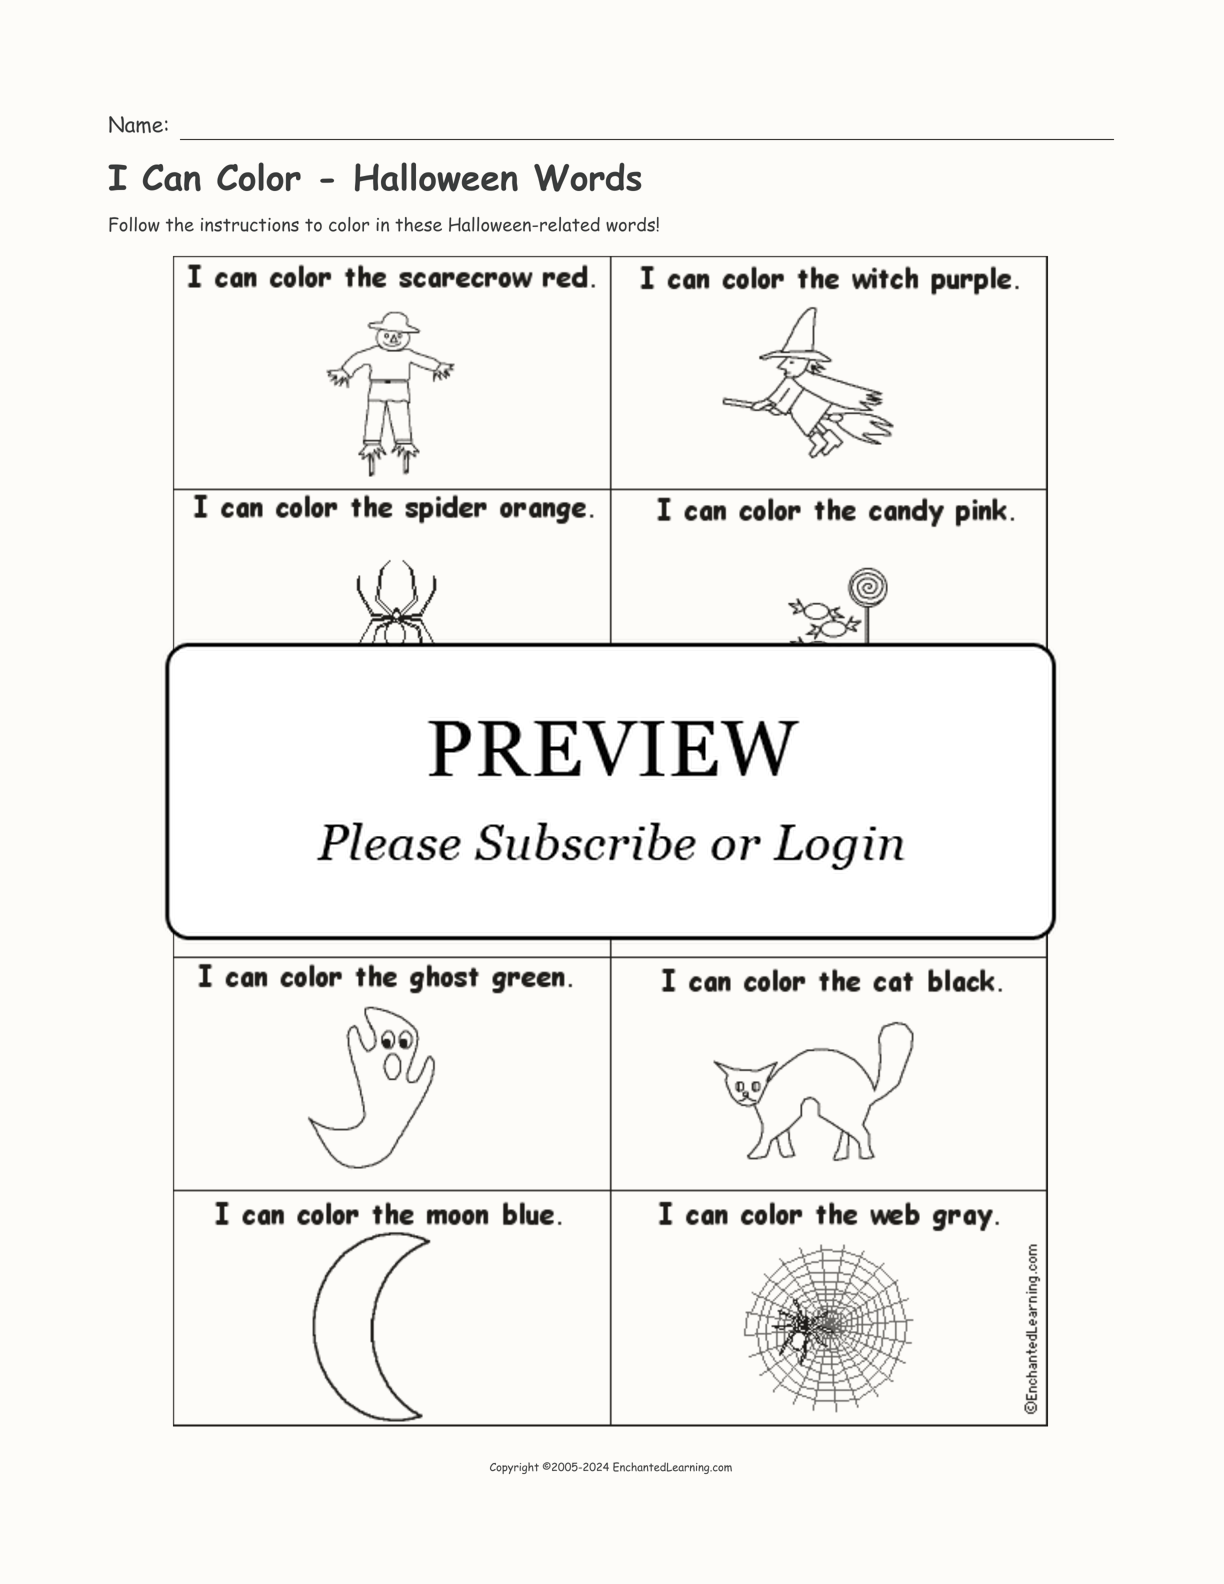 I Can Color - Halloween Words interactive printout page 1